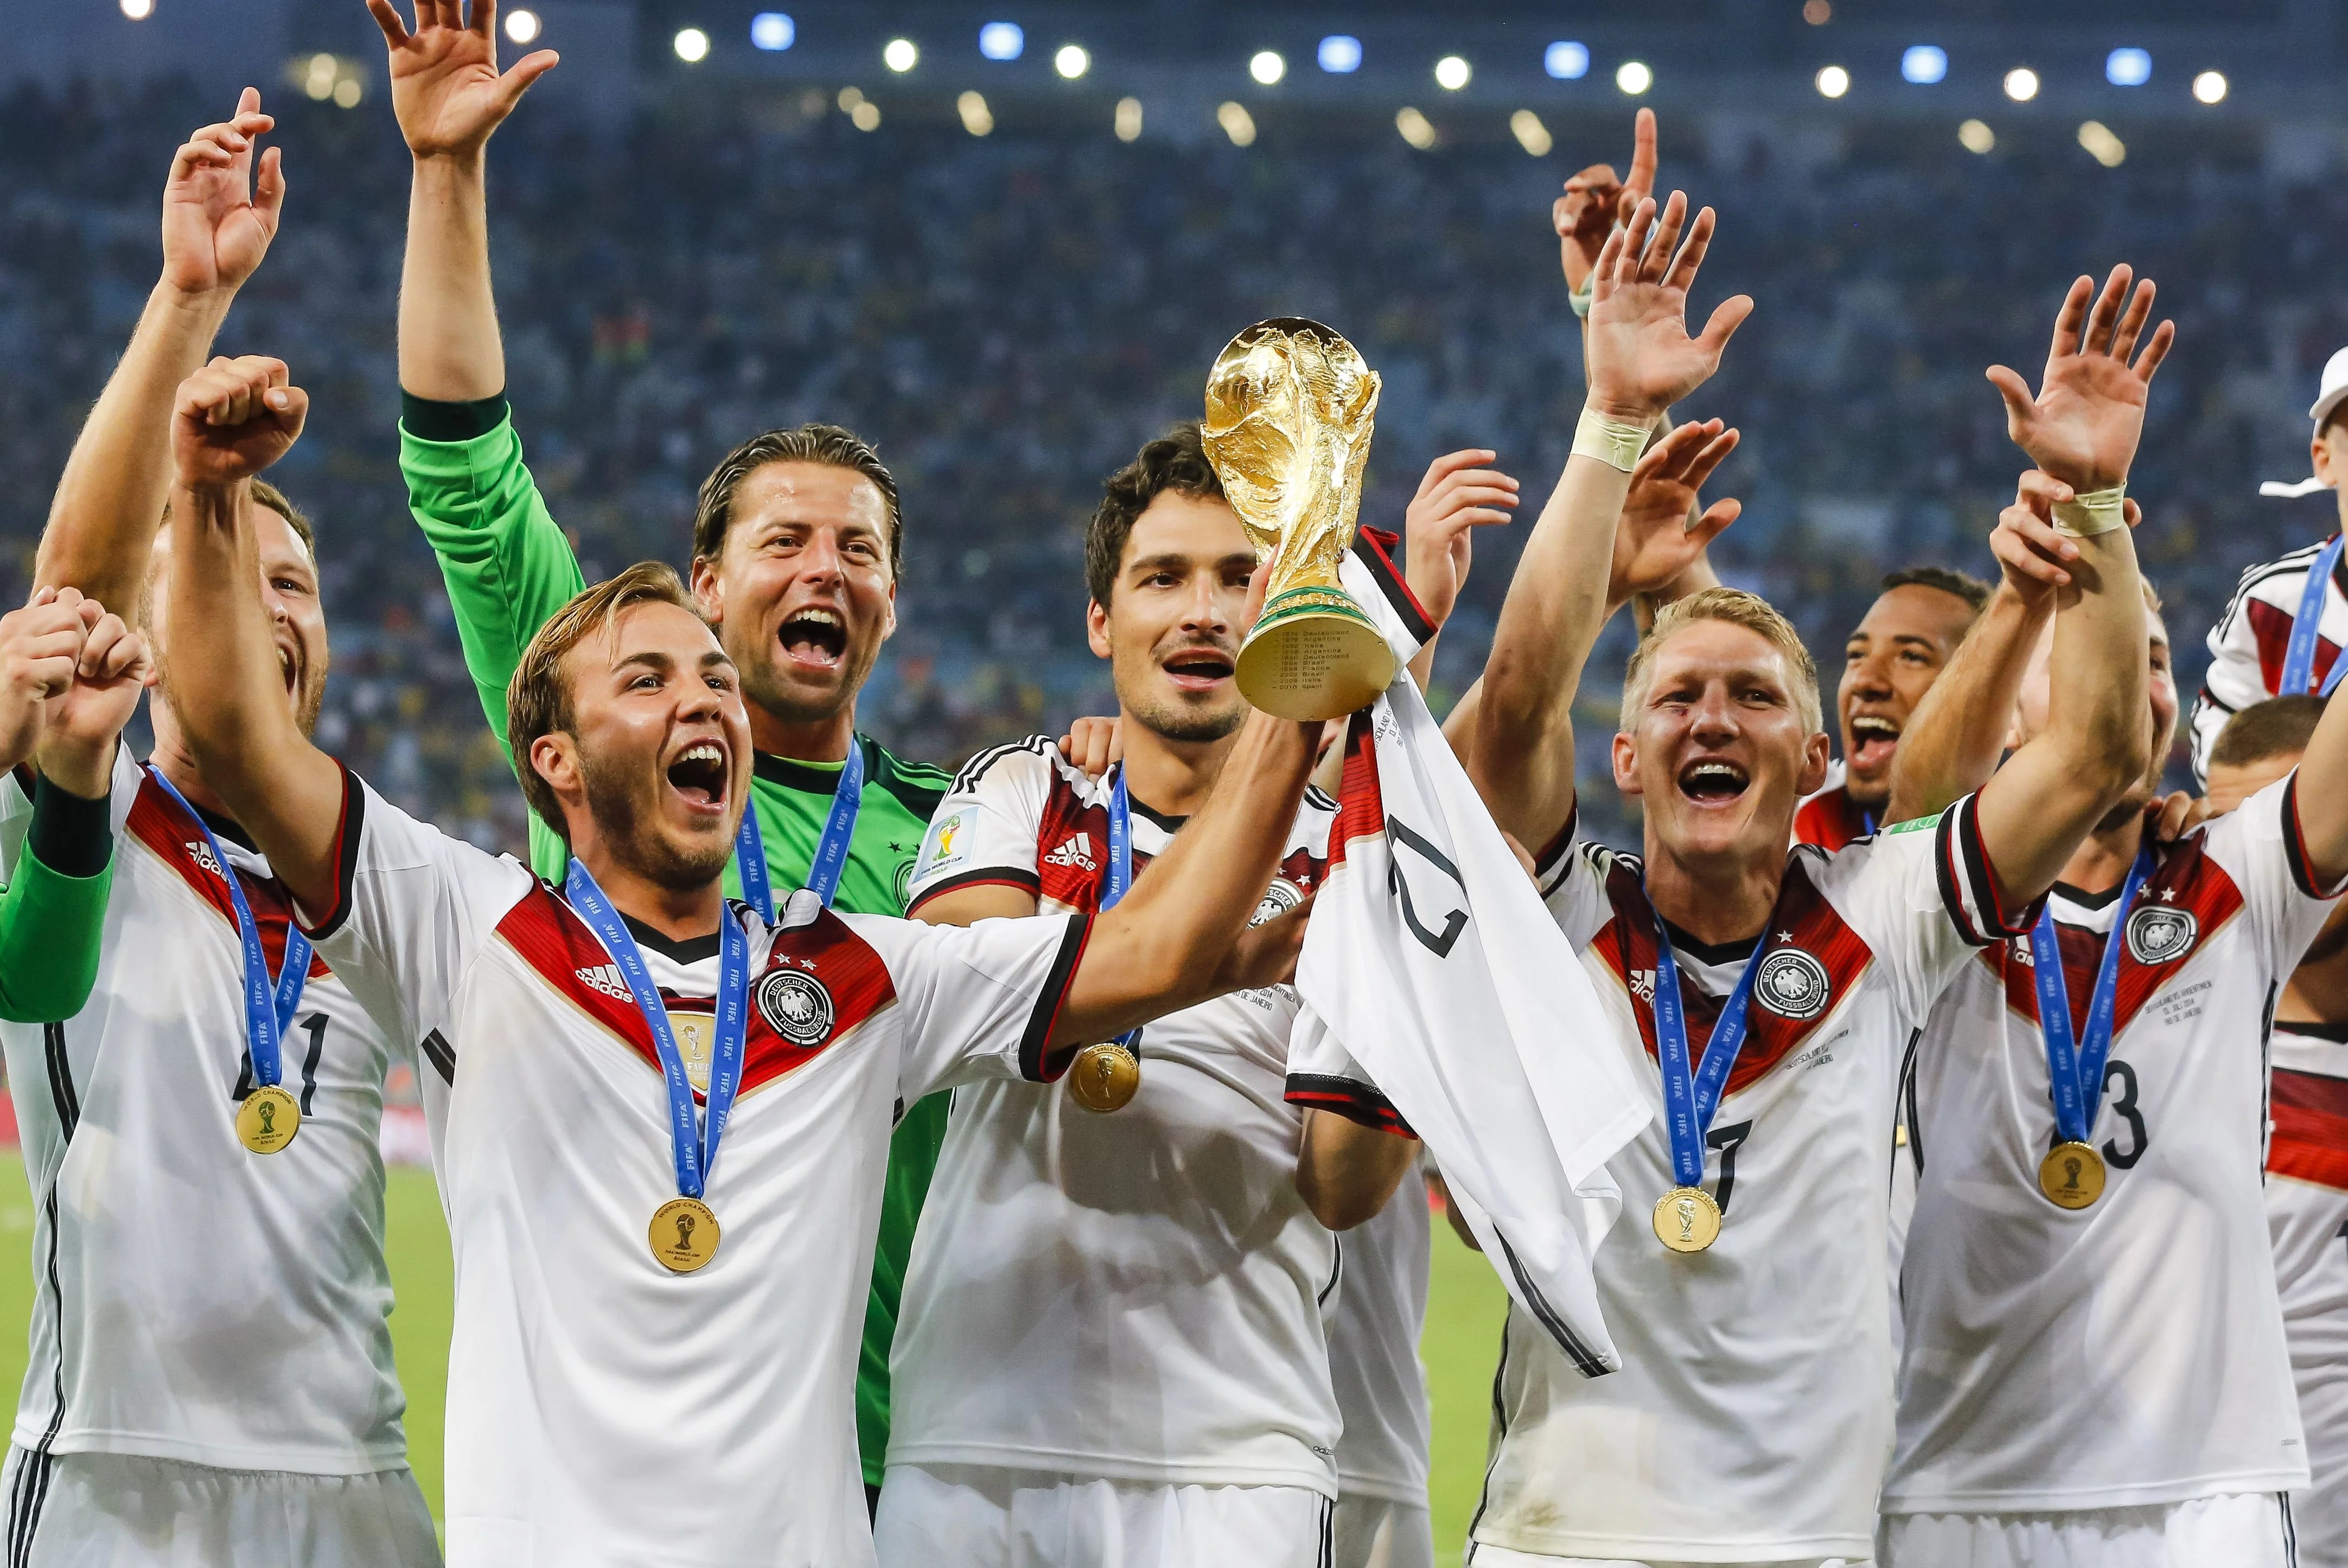 FIFA World Cup groups 2022: Group of DEATH Group E - Spain, Germany, Japan, Two World Cup winners meet in Group E, Check teams and fixtures - WC 2022 Schedule